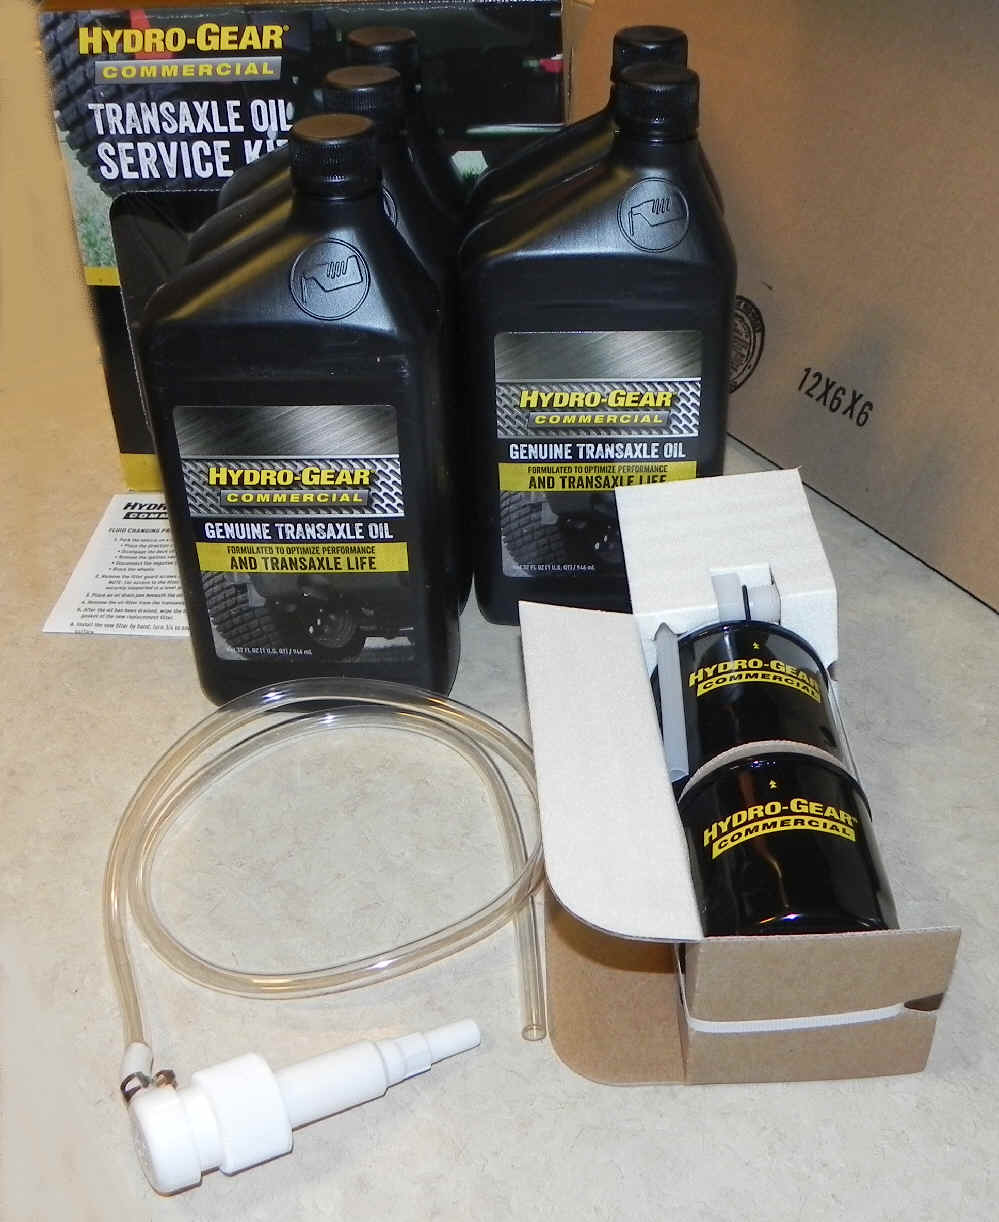 Hydro-Gear Oil Service Kit Part Number 72750